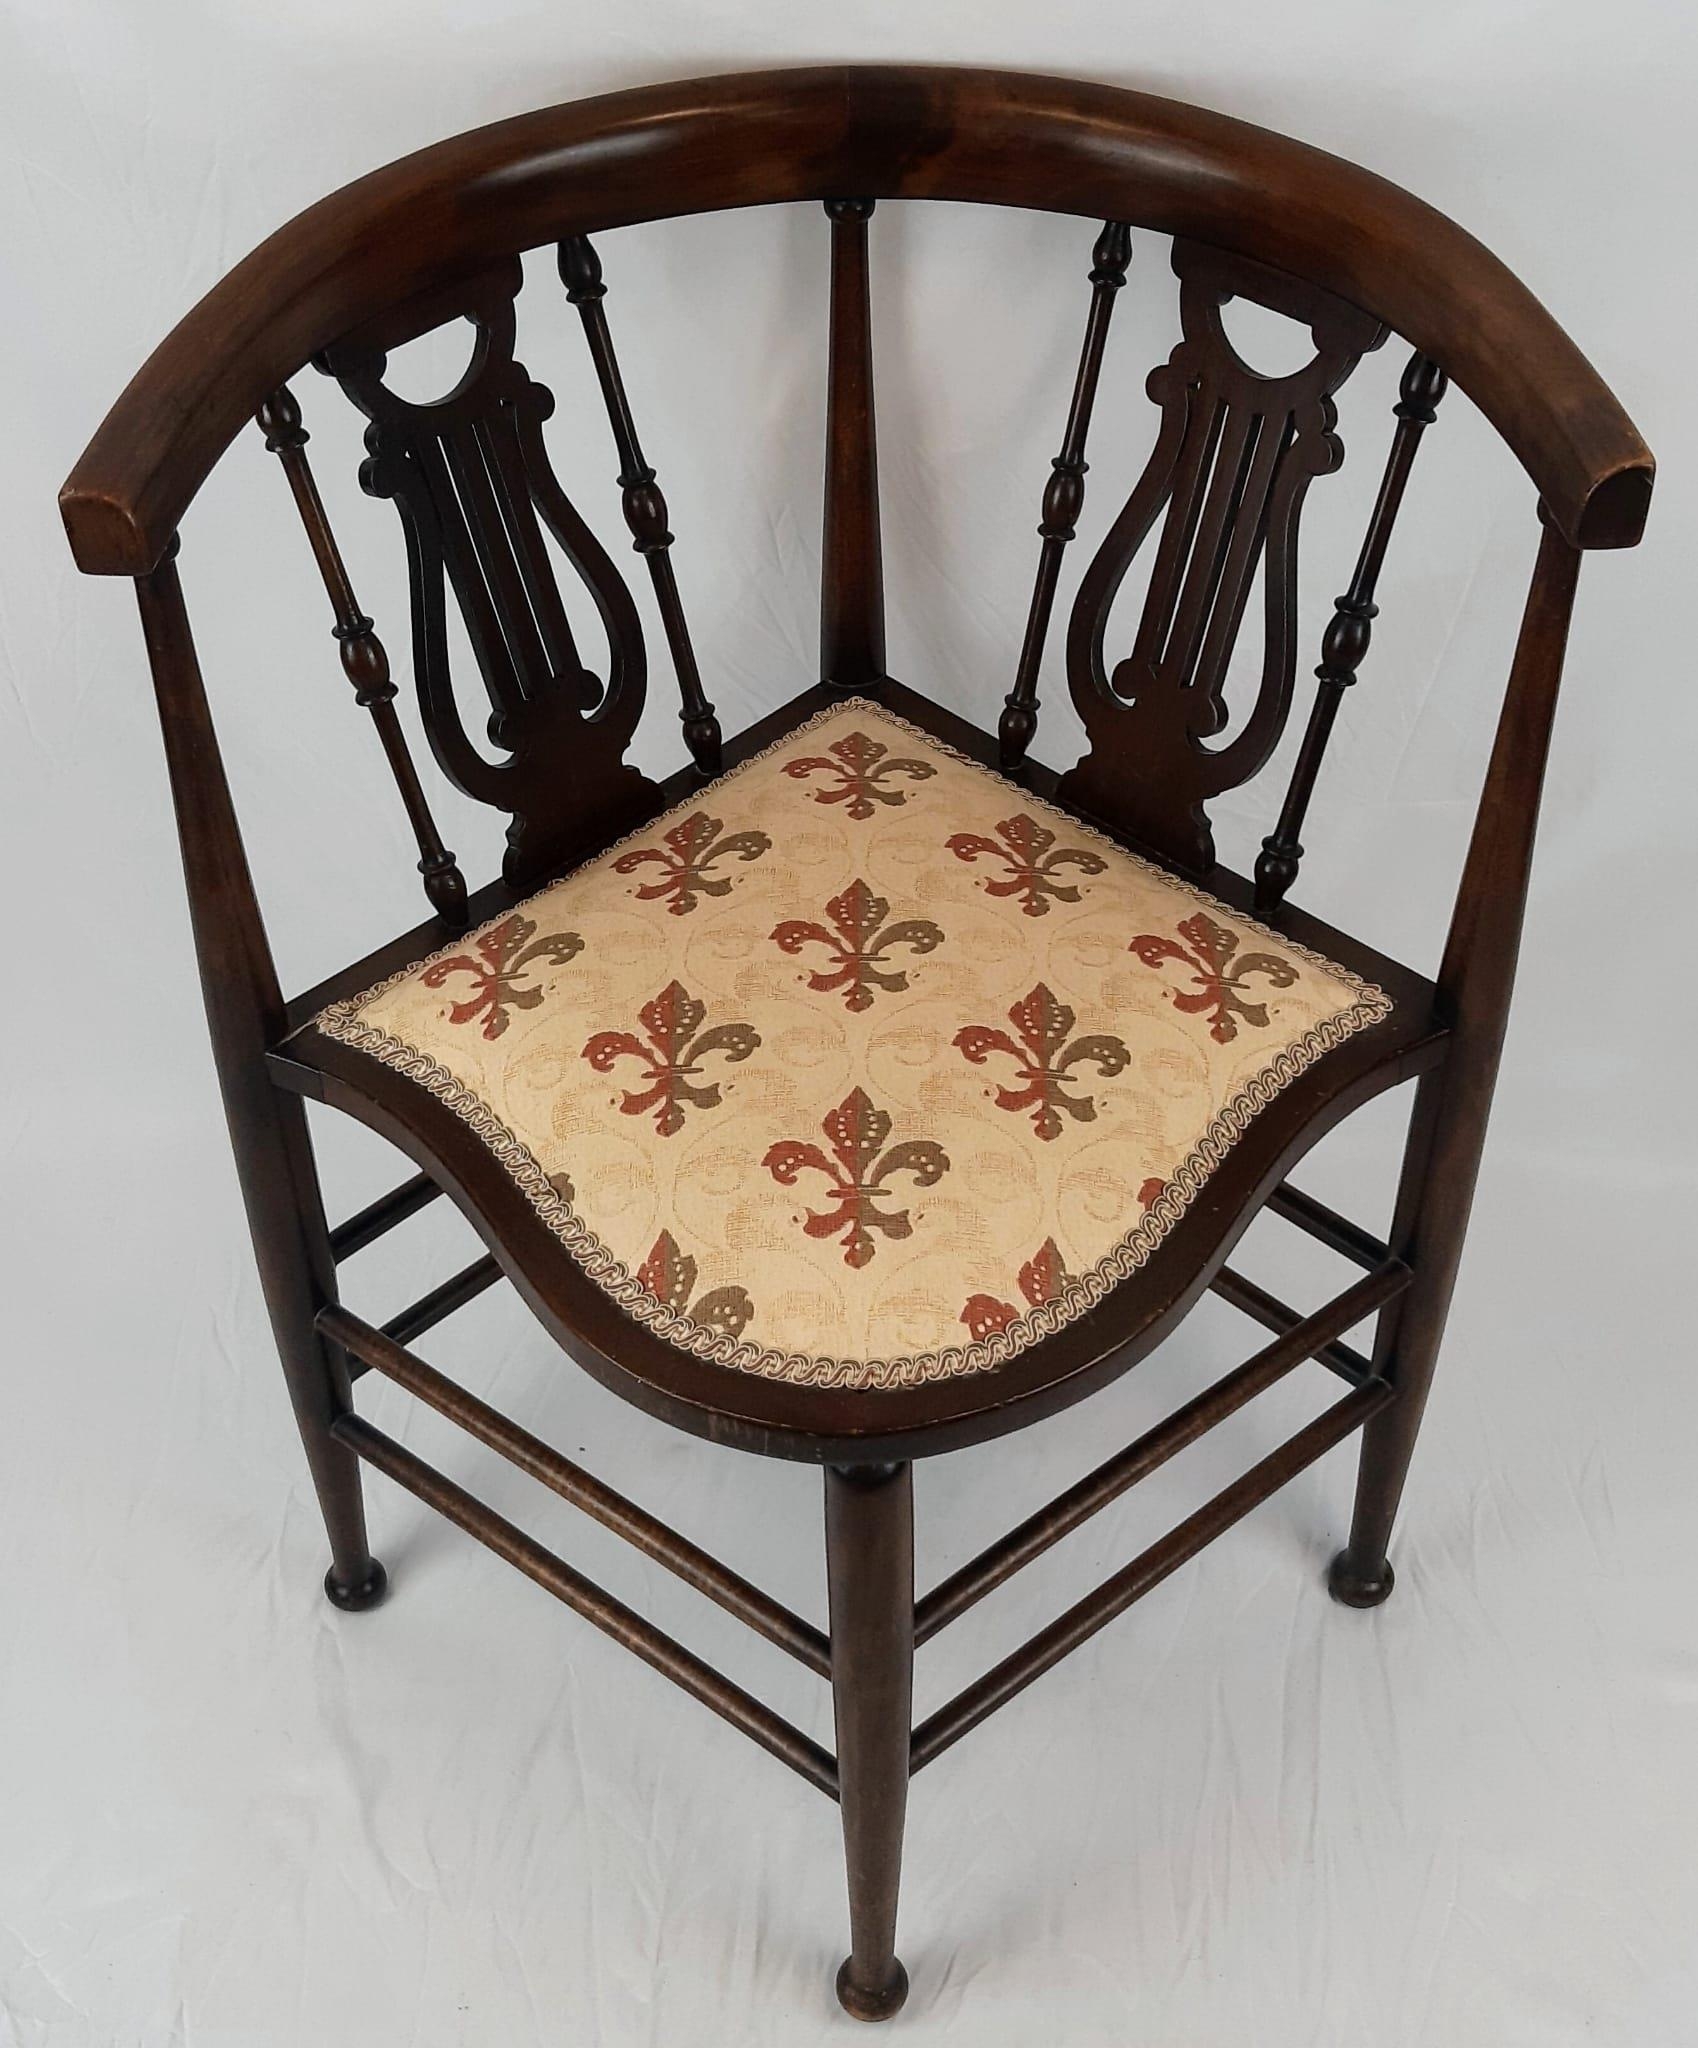 A VICTORIAN CORNER CHAIR TASTEFULLY REUPHOLSTERED WITH CURVED BACK REST ON HARP SHAPED STRUTTS. - Image 2 of 6